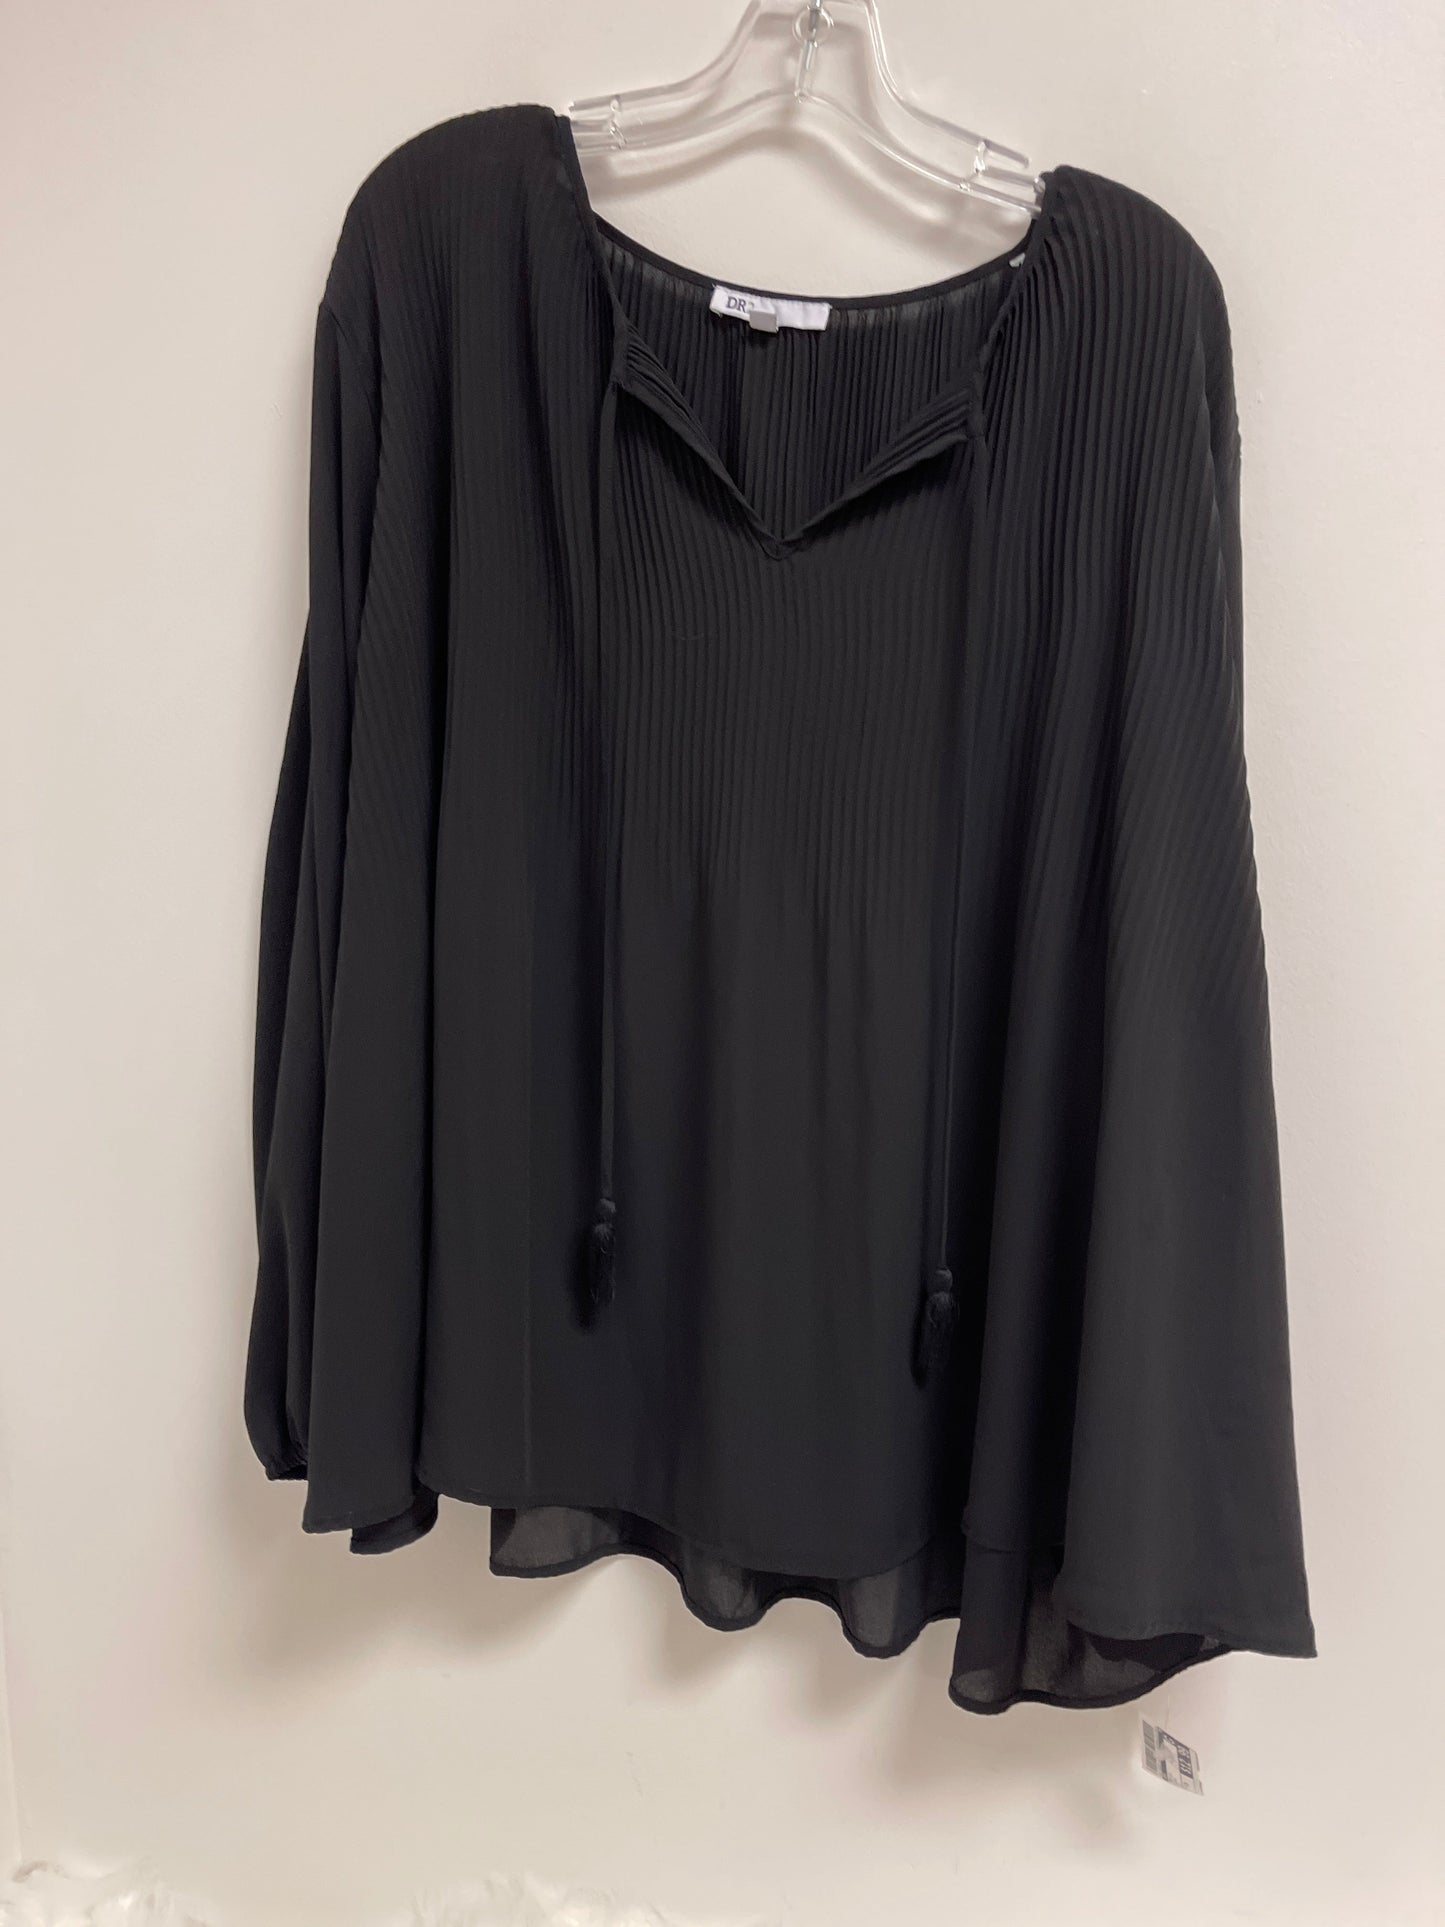 Black Top Long Sleeve Dr2, Size 2x